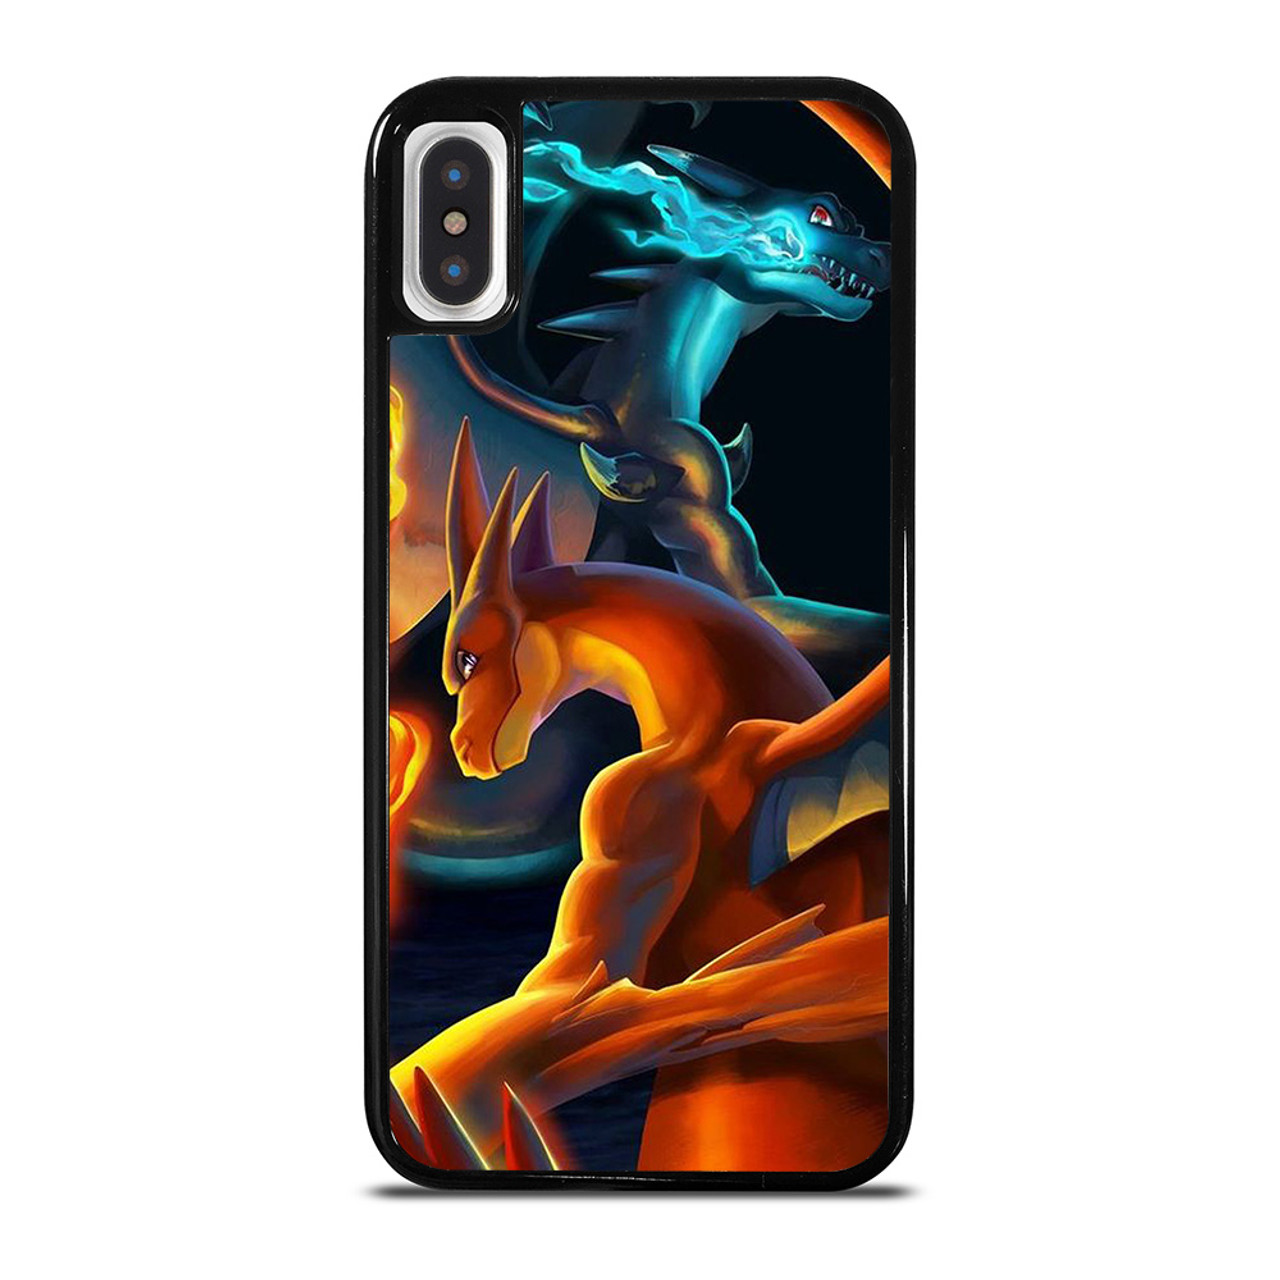 Anime One Piece Luffy iPhone X Case - CASESHUNTER